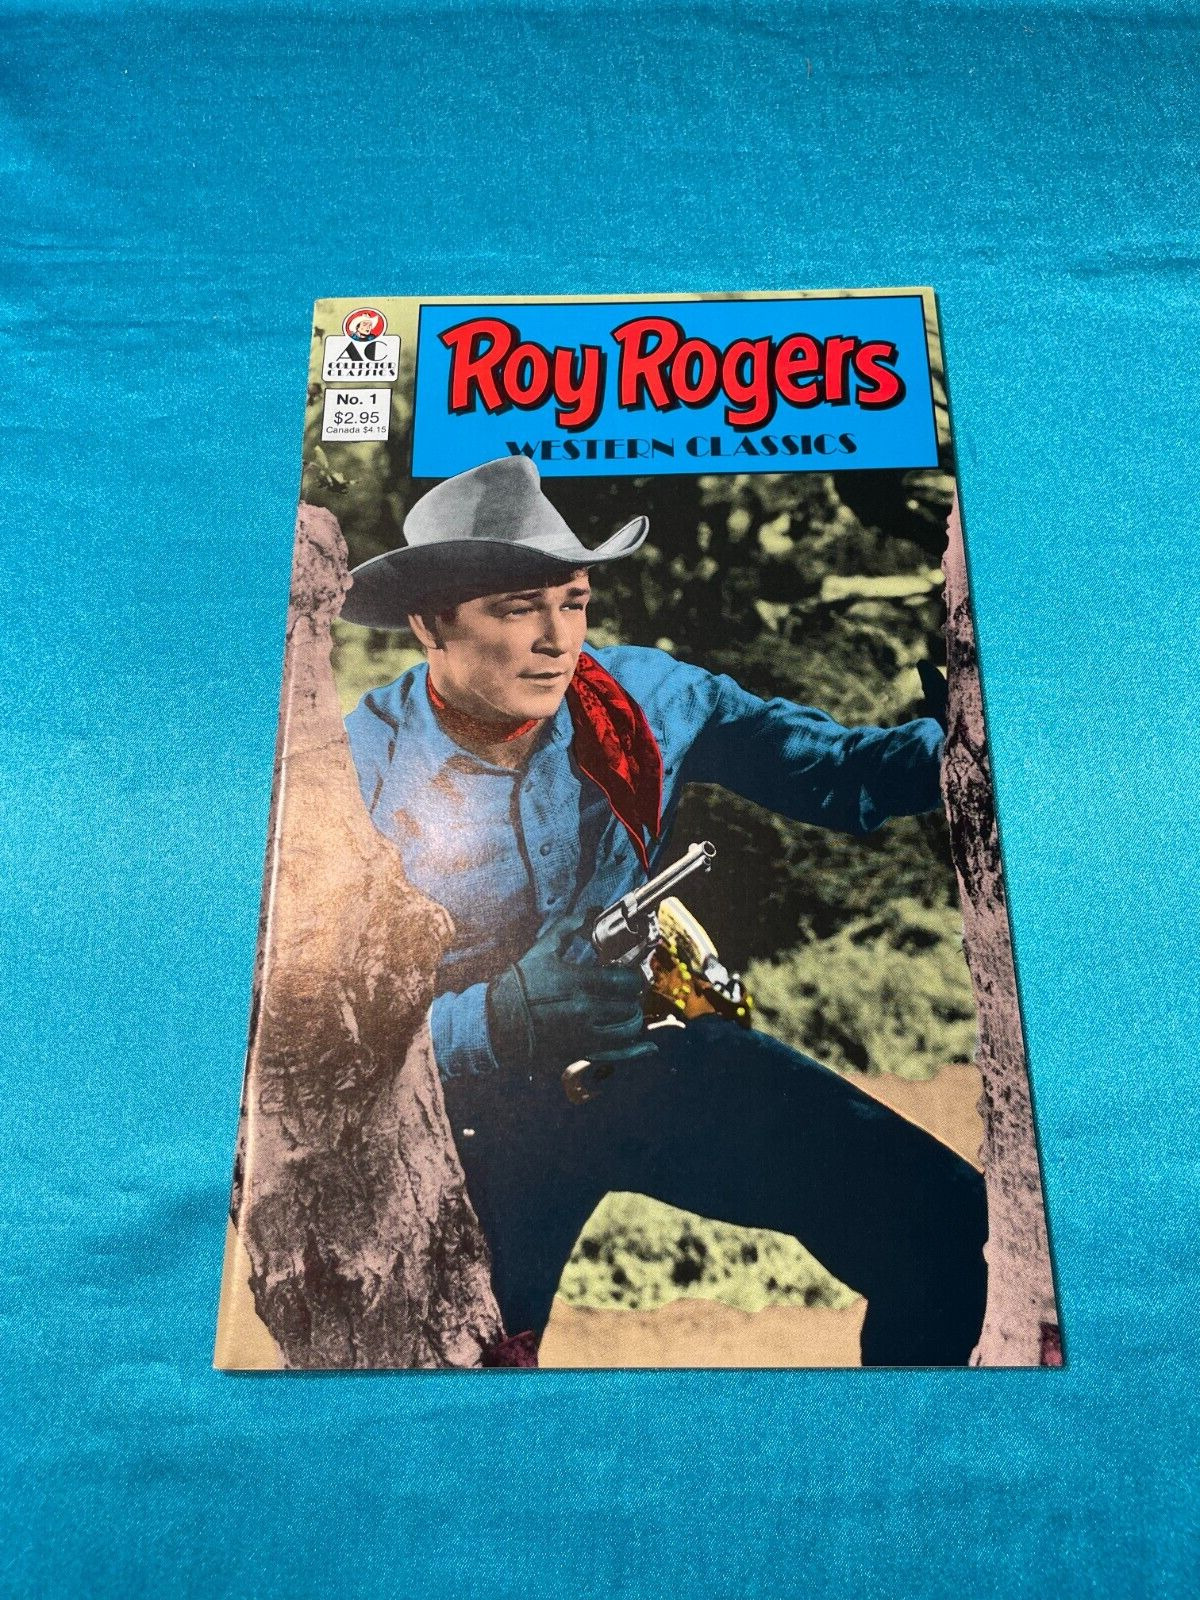 ROY ROGERS WESTERN CLASSICS # 1, 1989, VERY FINE CONDITION